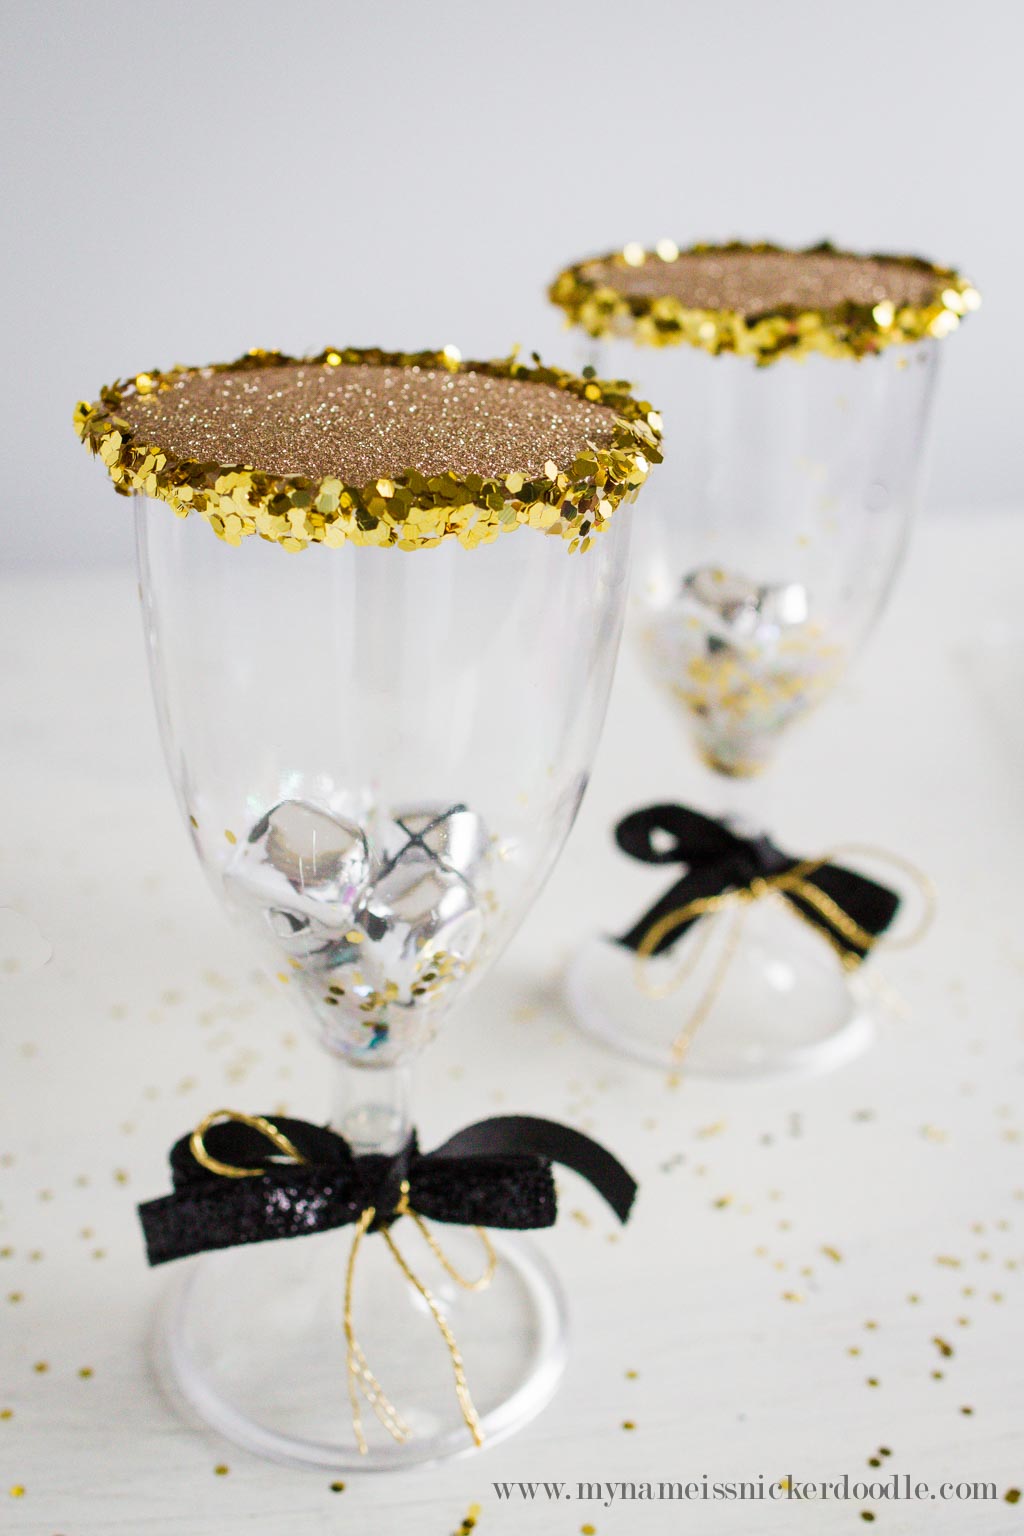 A Cup Of Cheerful Noisemakers - A fun New Year's Eve craft